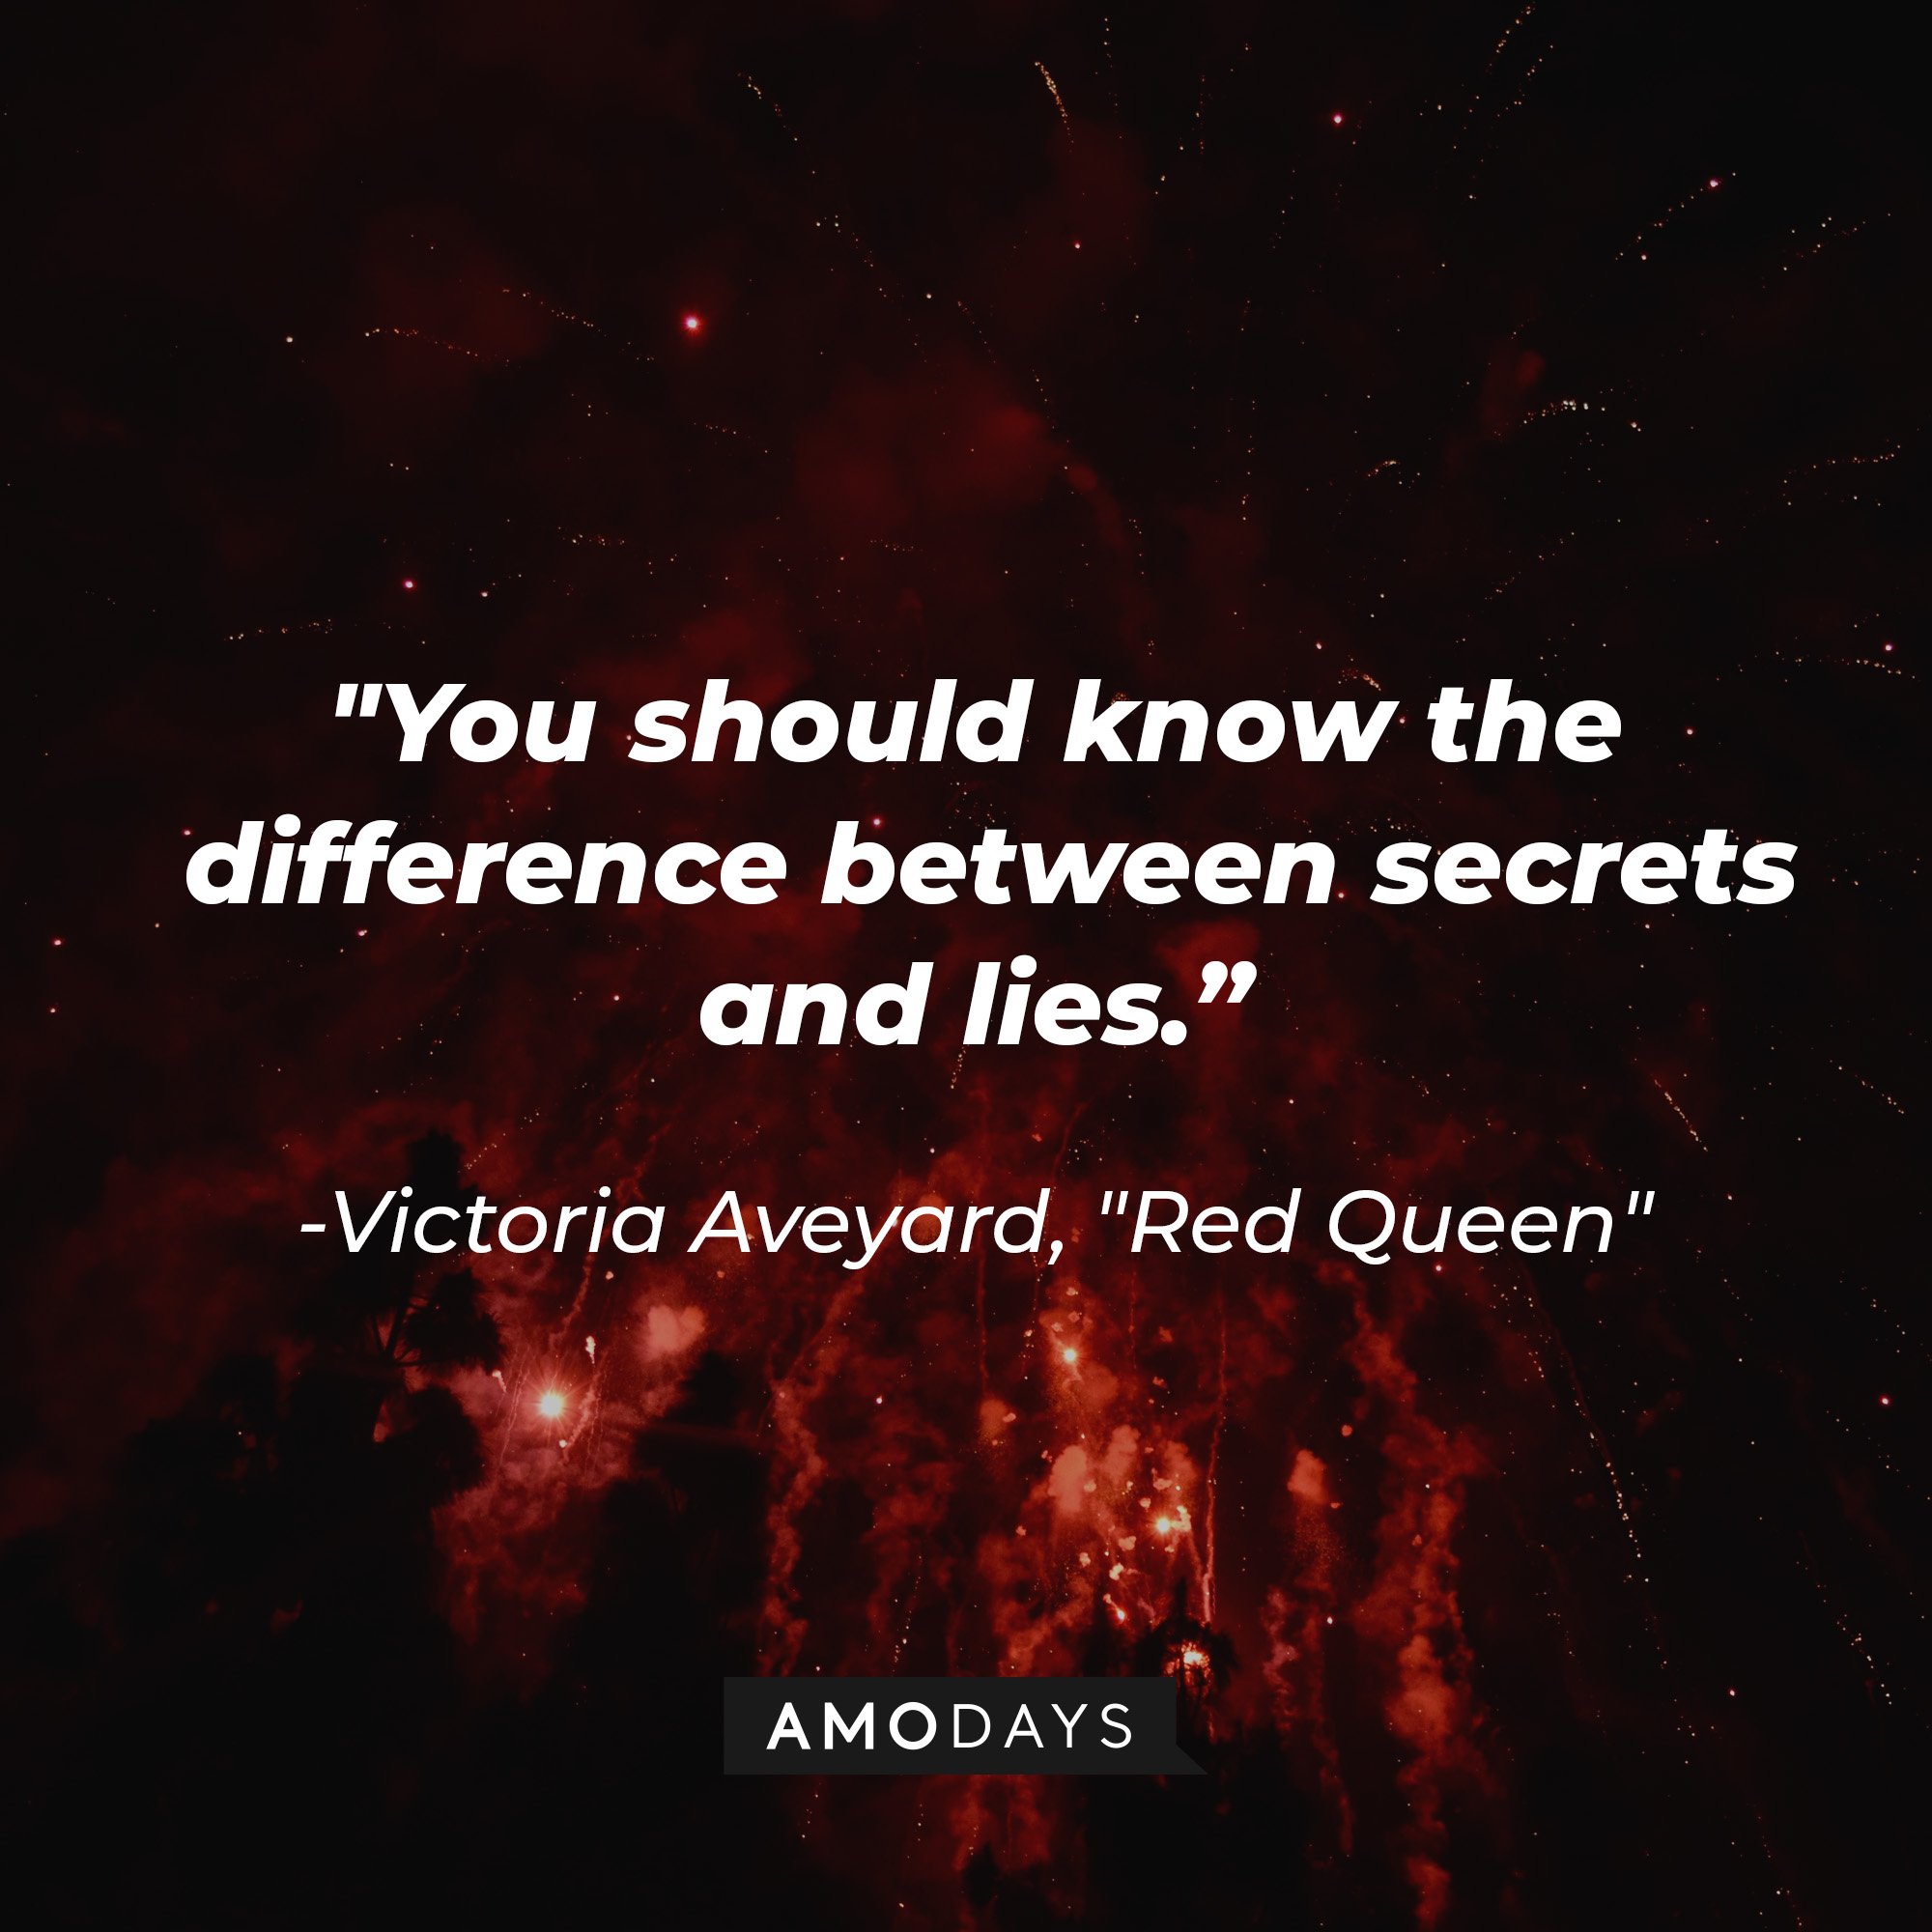 Victoria Aveyard’s quote in "Red Queen”: "You should know the difference between secrets and lies." | Image: AmoDays